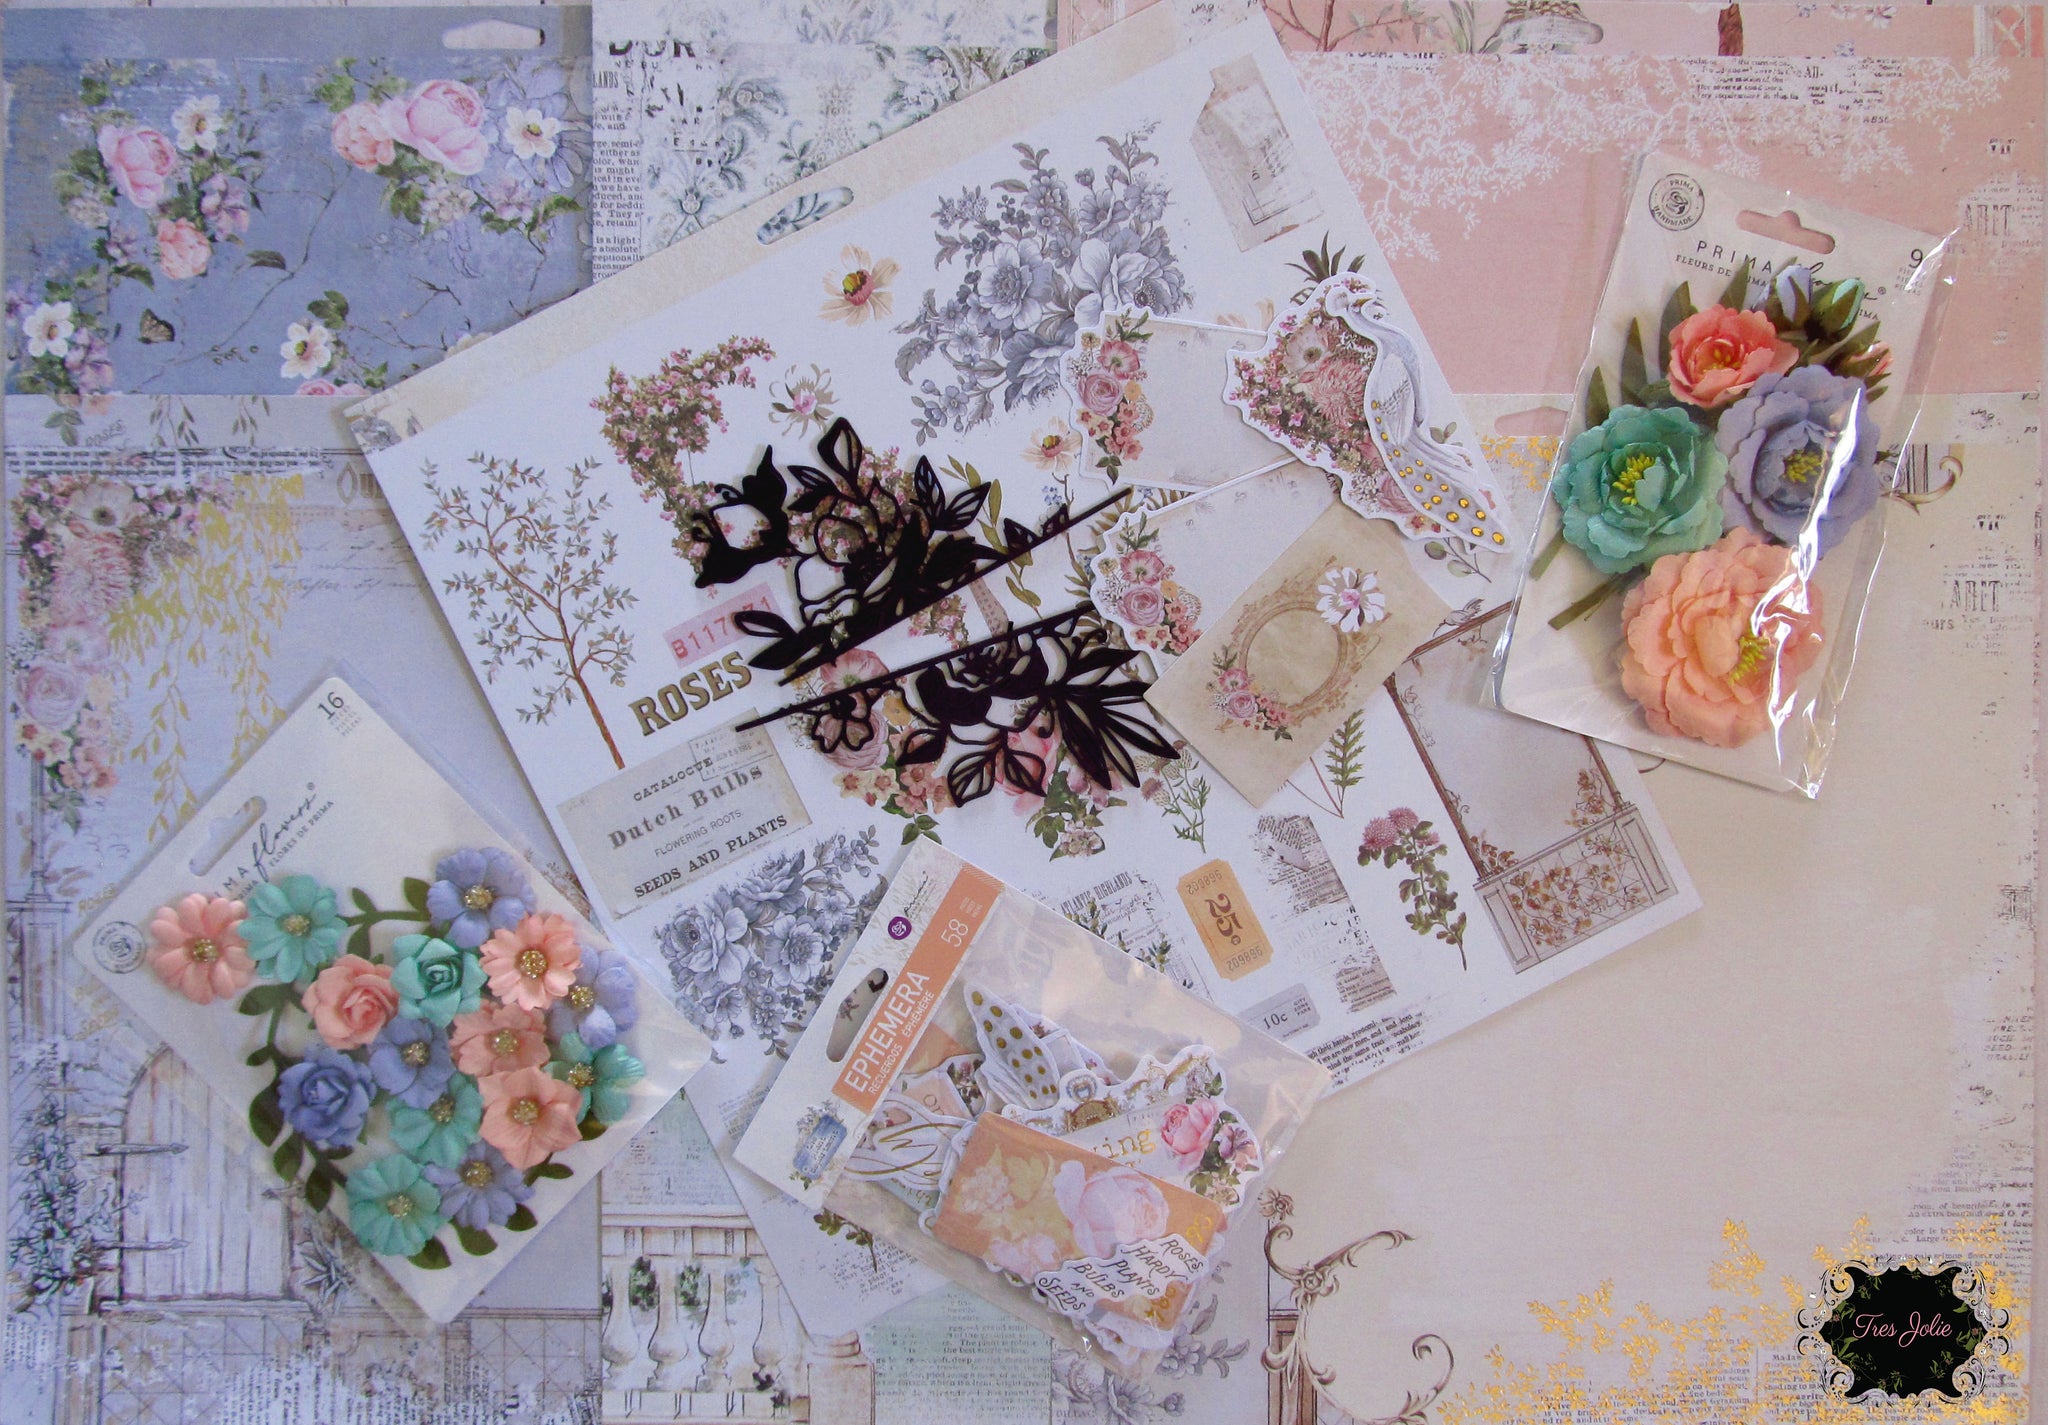 Wedding Scrapbook Kit - 3 Sheets 12 X Paper Tons Of Embellishments About  87 Items Scrapbooking & Cards Rr112 - 1 13 4ever